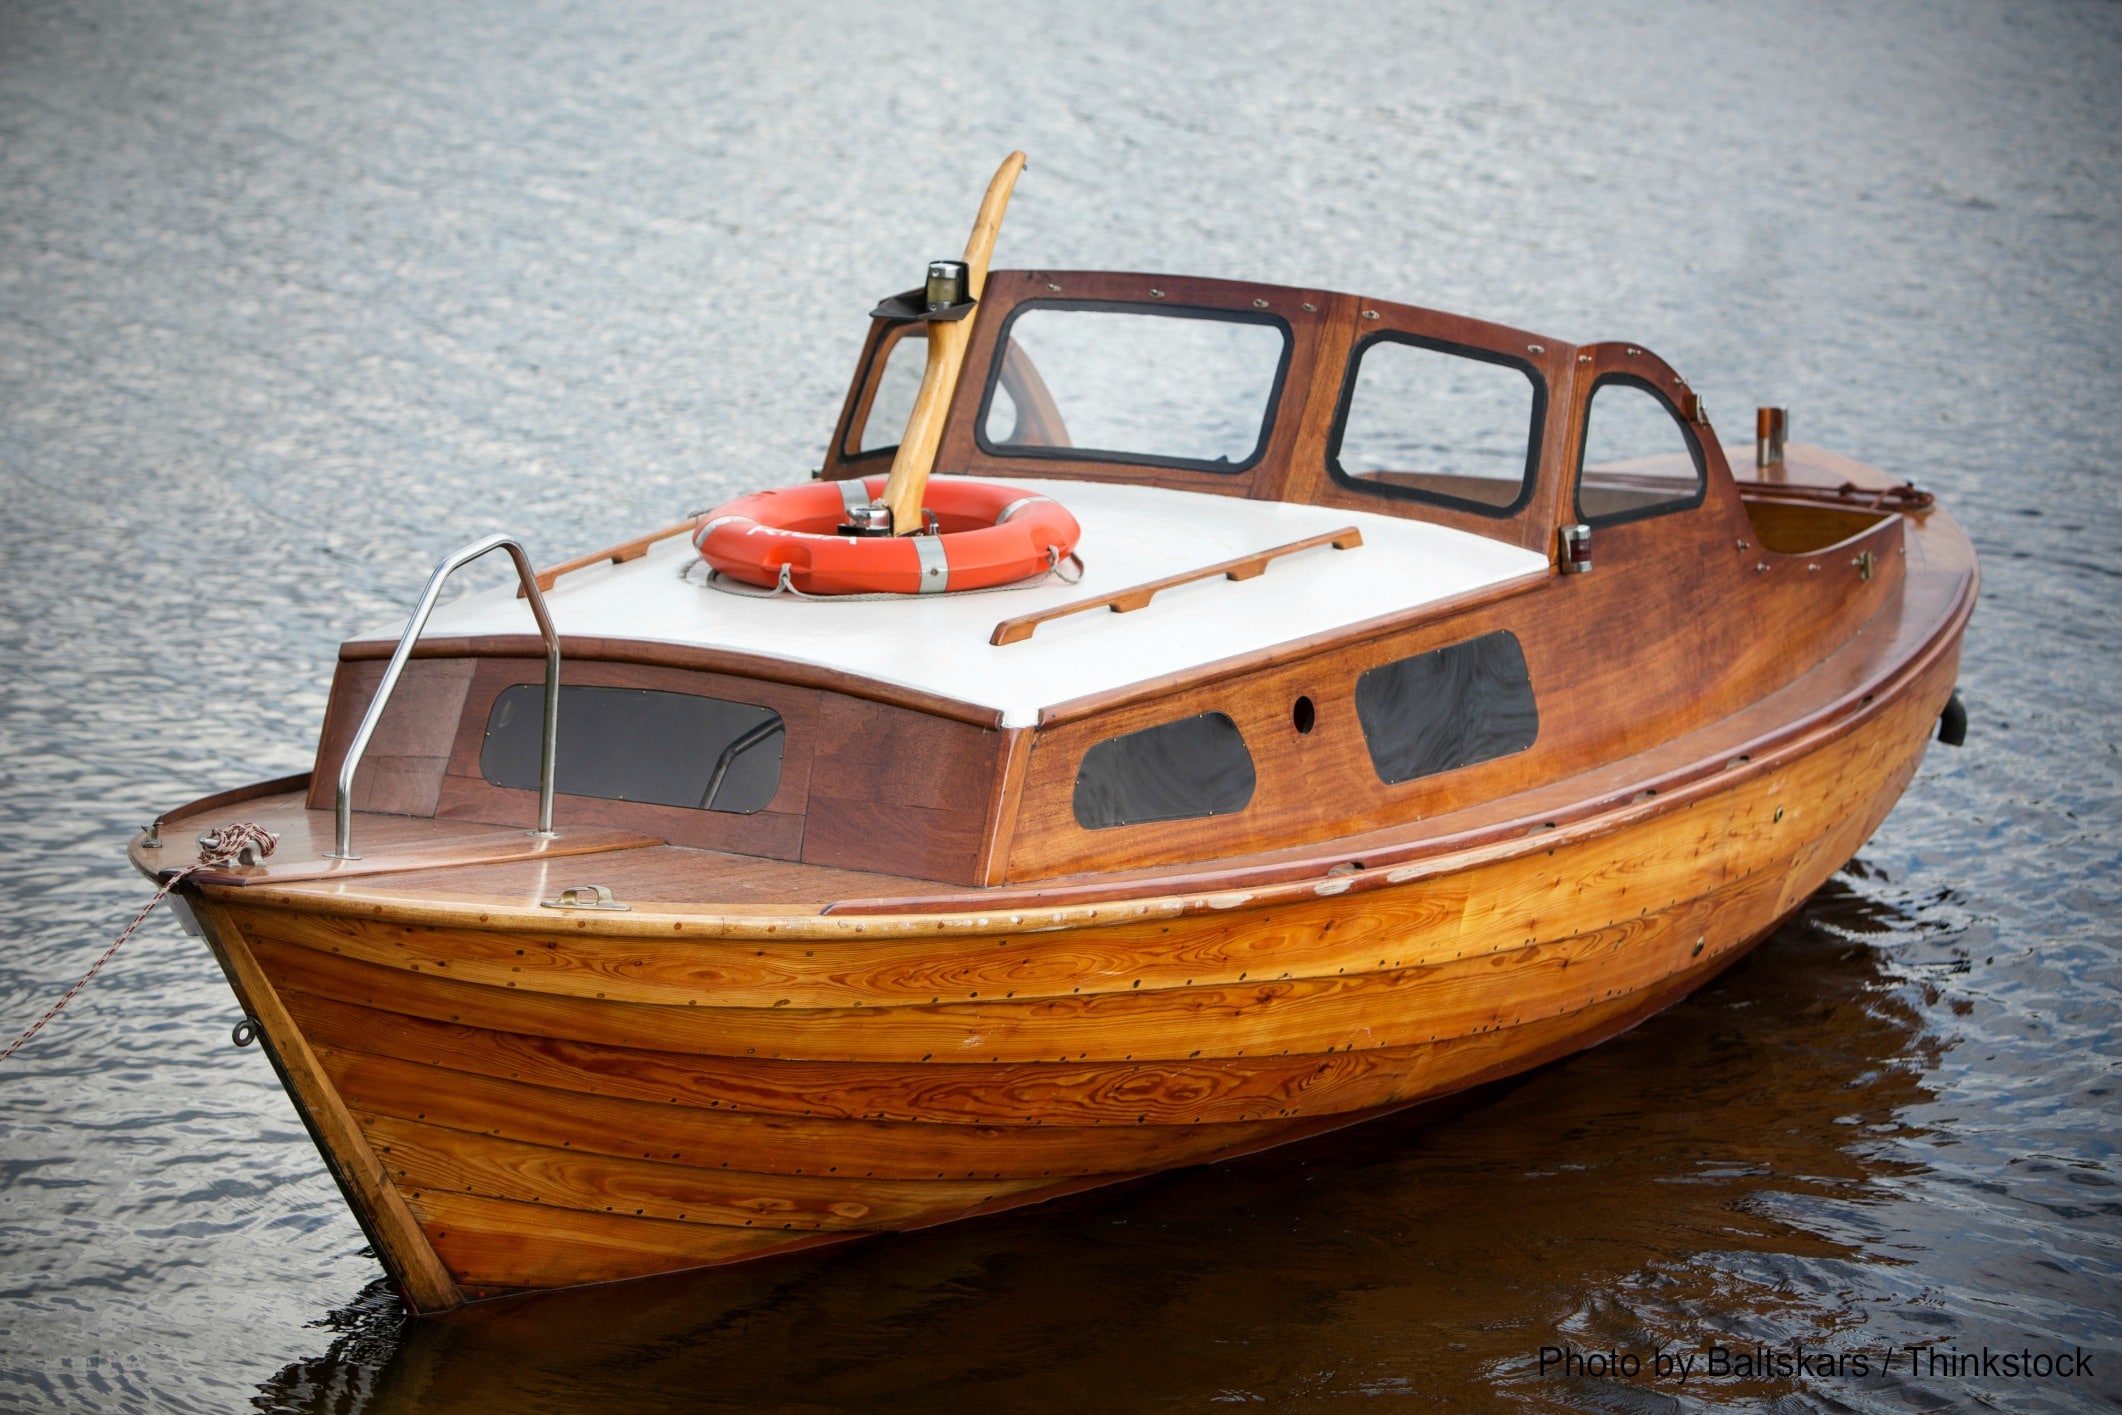 Everything You Need To Know About The Wooden Boat Show In Mystic Ct